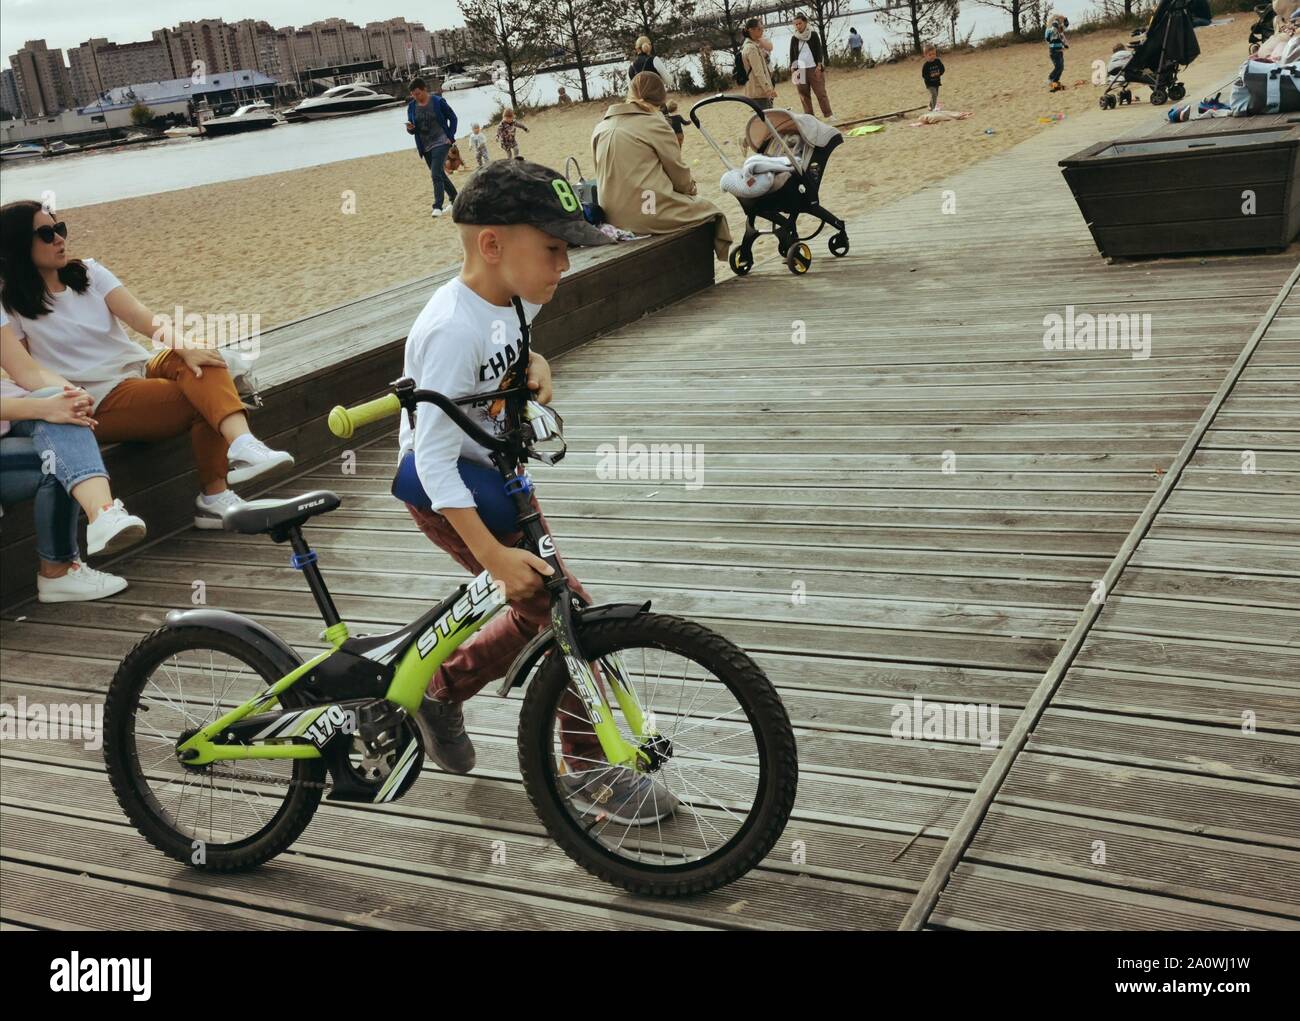 St. Petersburg, Russia-01.09.2019: a child rides a Bicycle on the Playground. Young cyclist on a Sunny day. Stock Photo